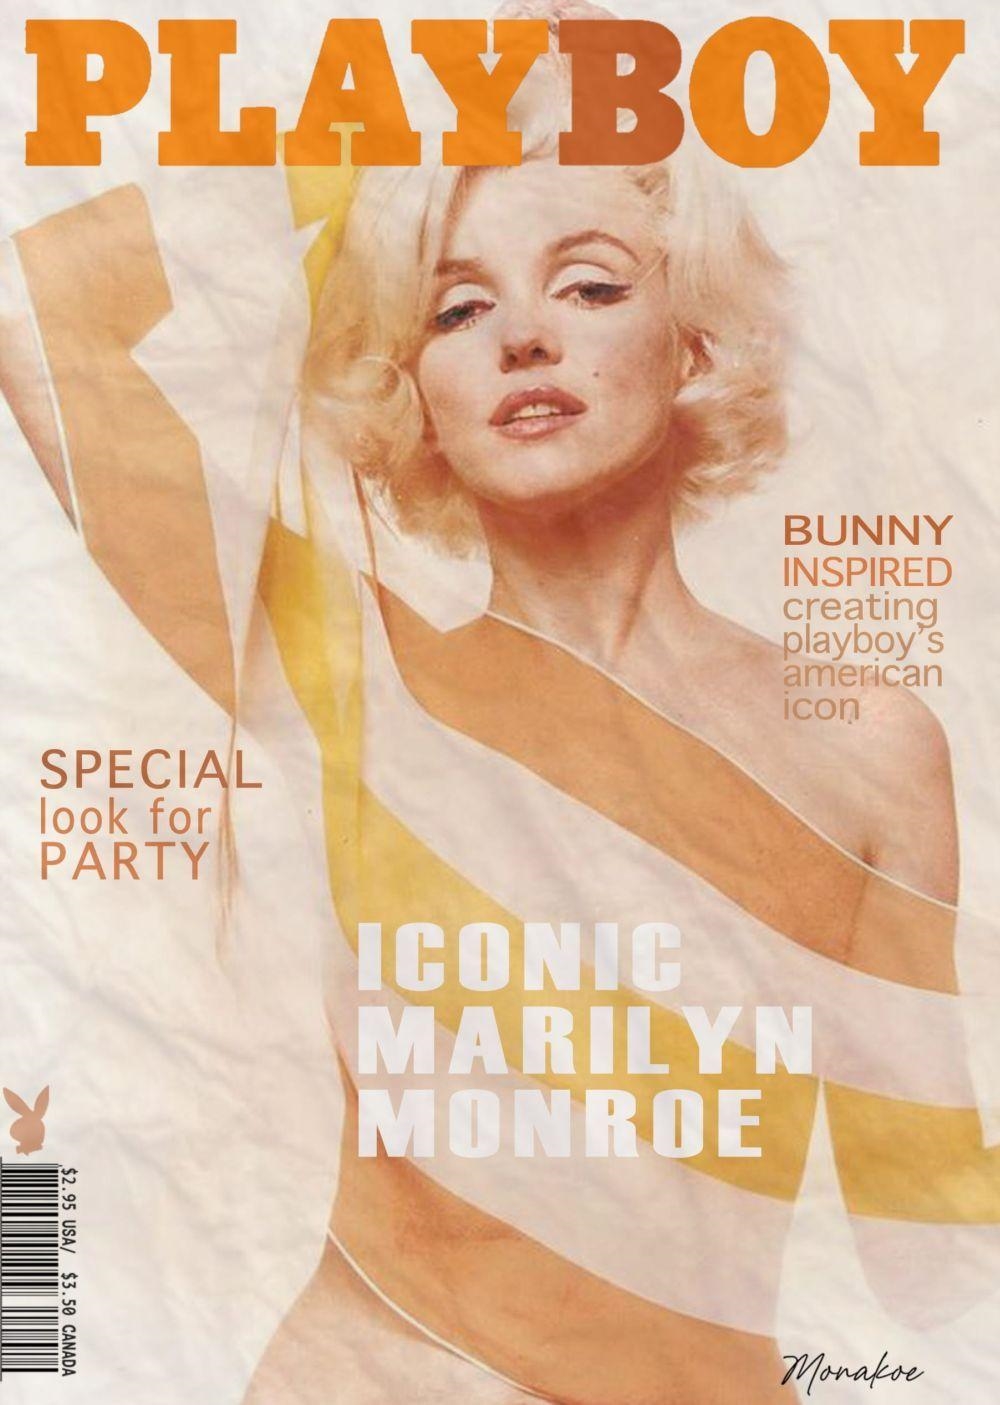 Artwork by Monakoe, PlayBoy Magazine, Marilyn, Made of Print on Fine Arts Paper